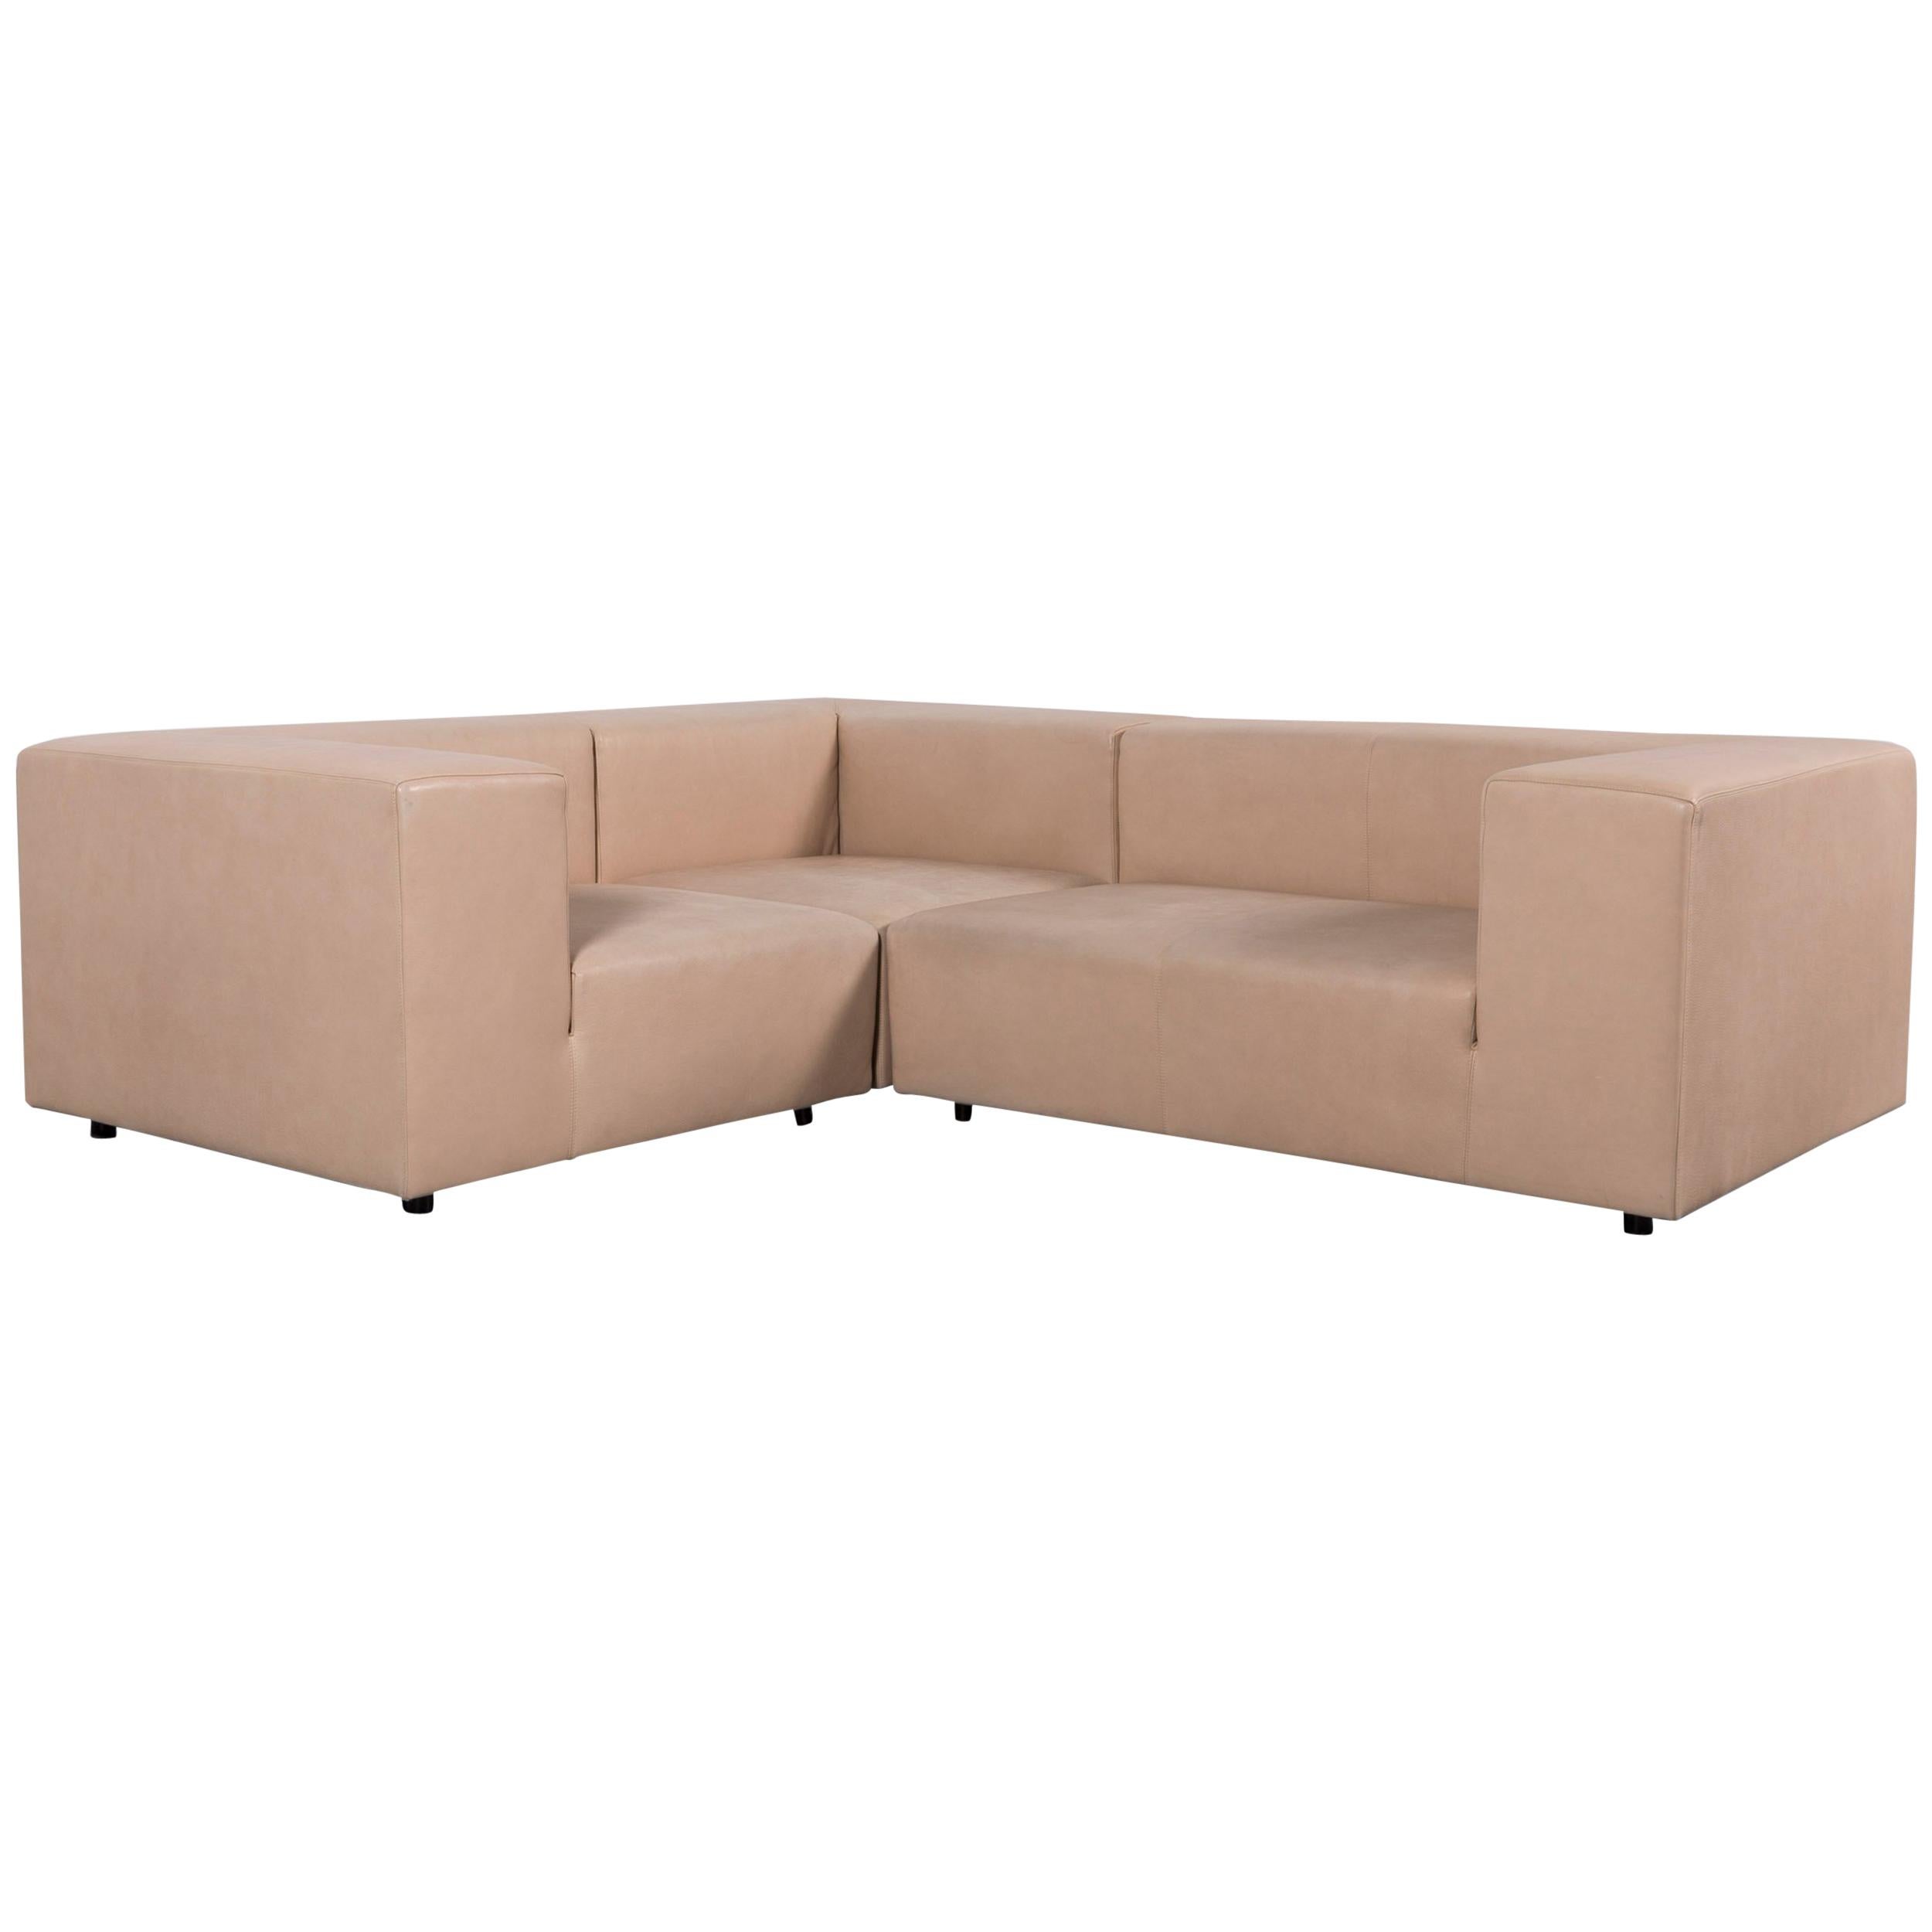 Wittmann Designer Leather Sofa Brown Beige Two-Seat Couch Modern